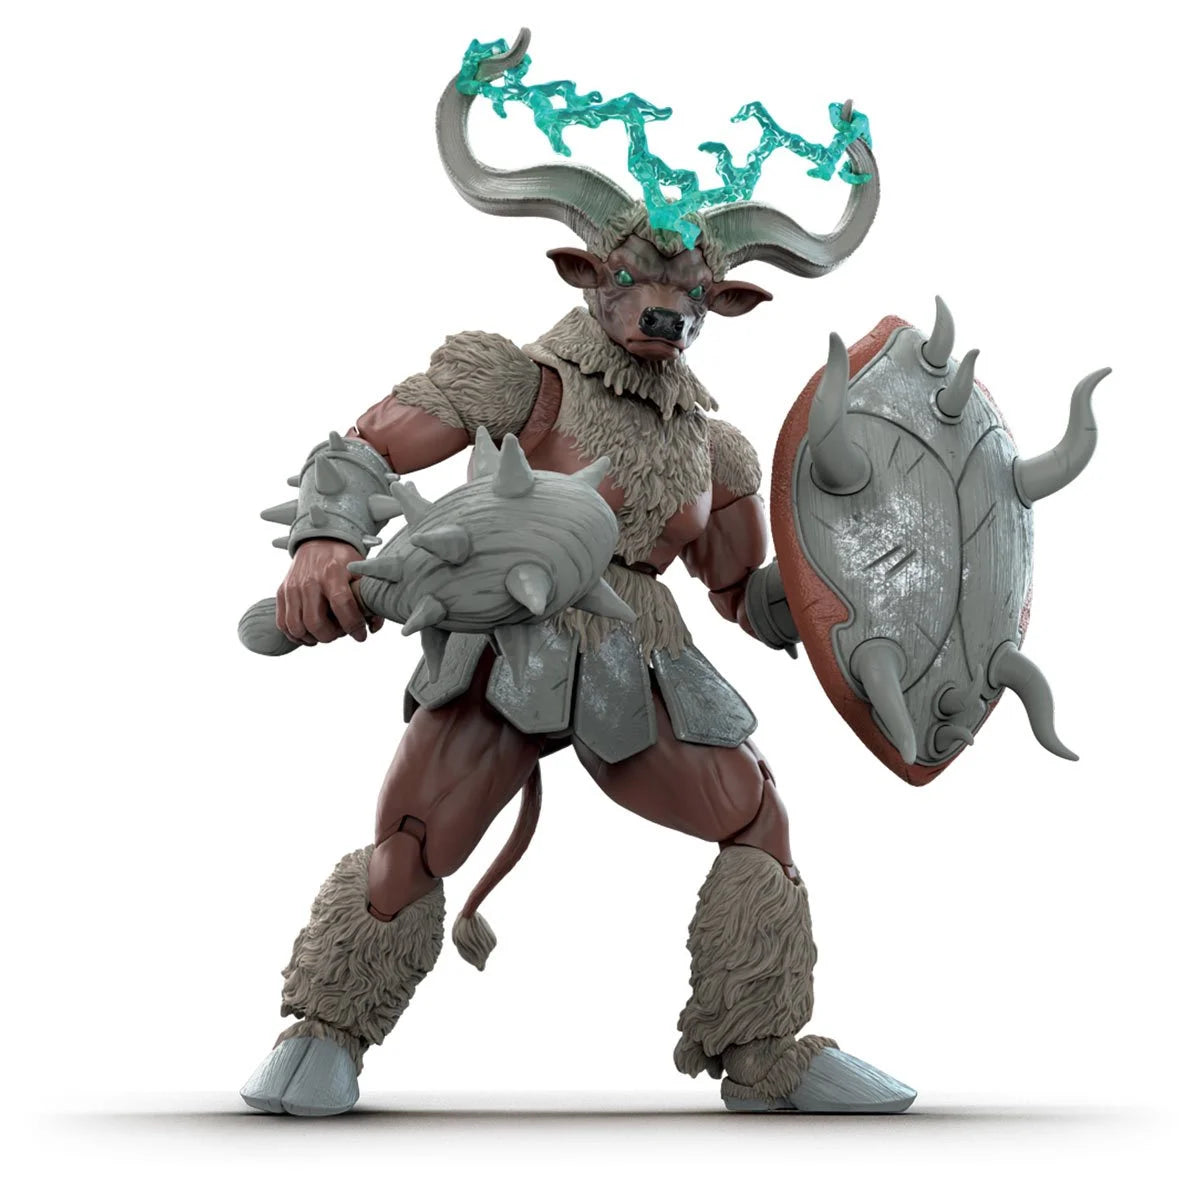 Power Rangers Lightning Collection Mighty Morphin Mighty Minotaur 6-Inch Action Figure - Heretoserveyou